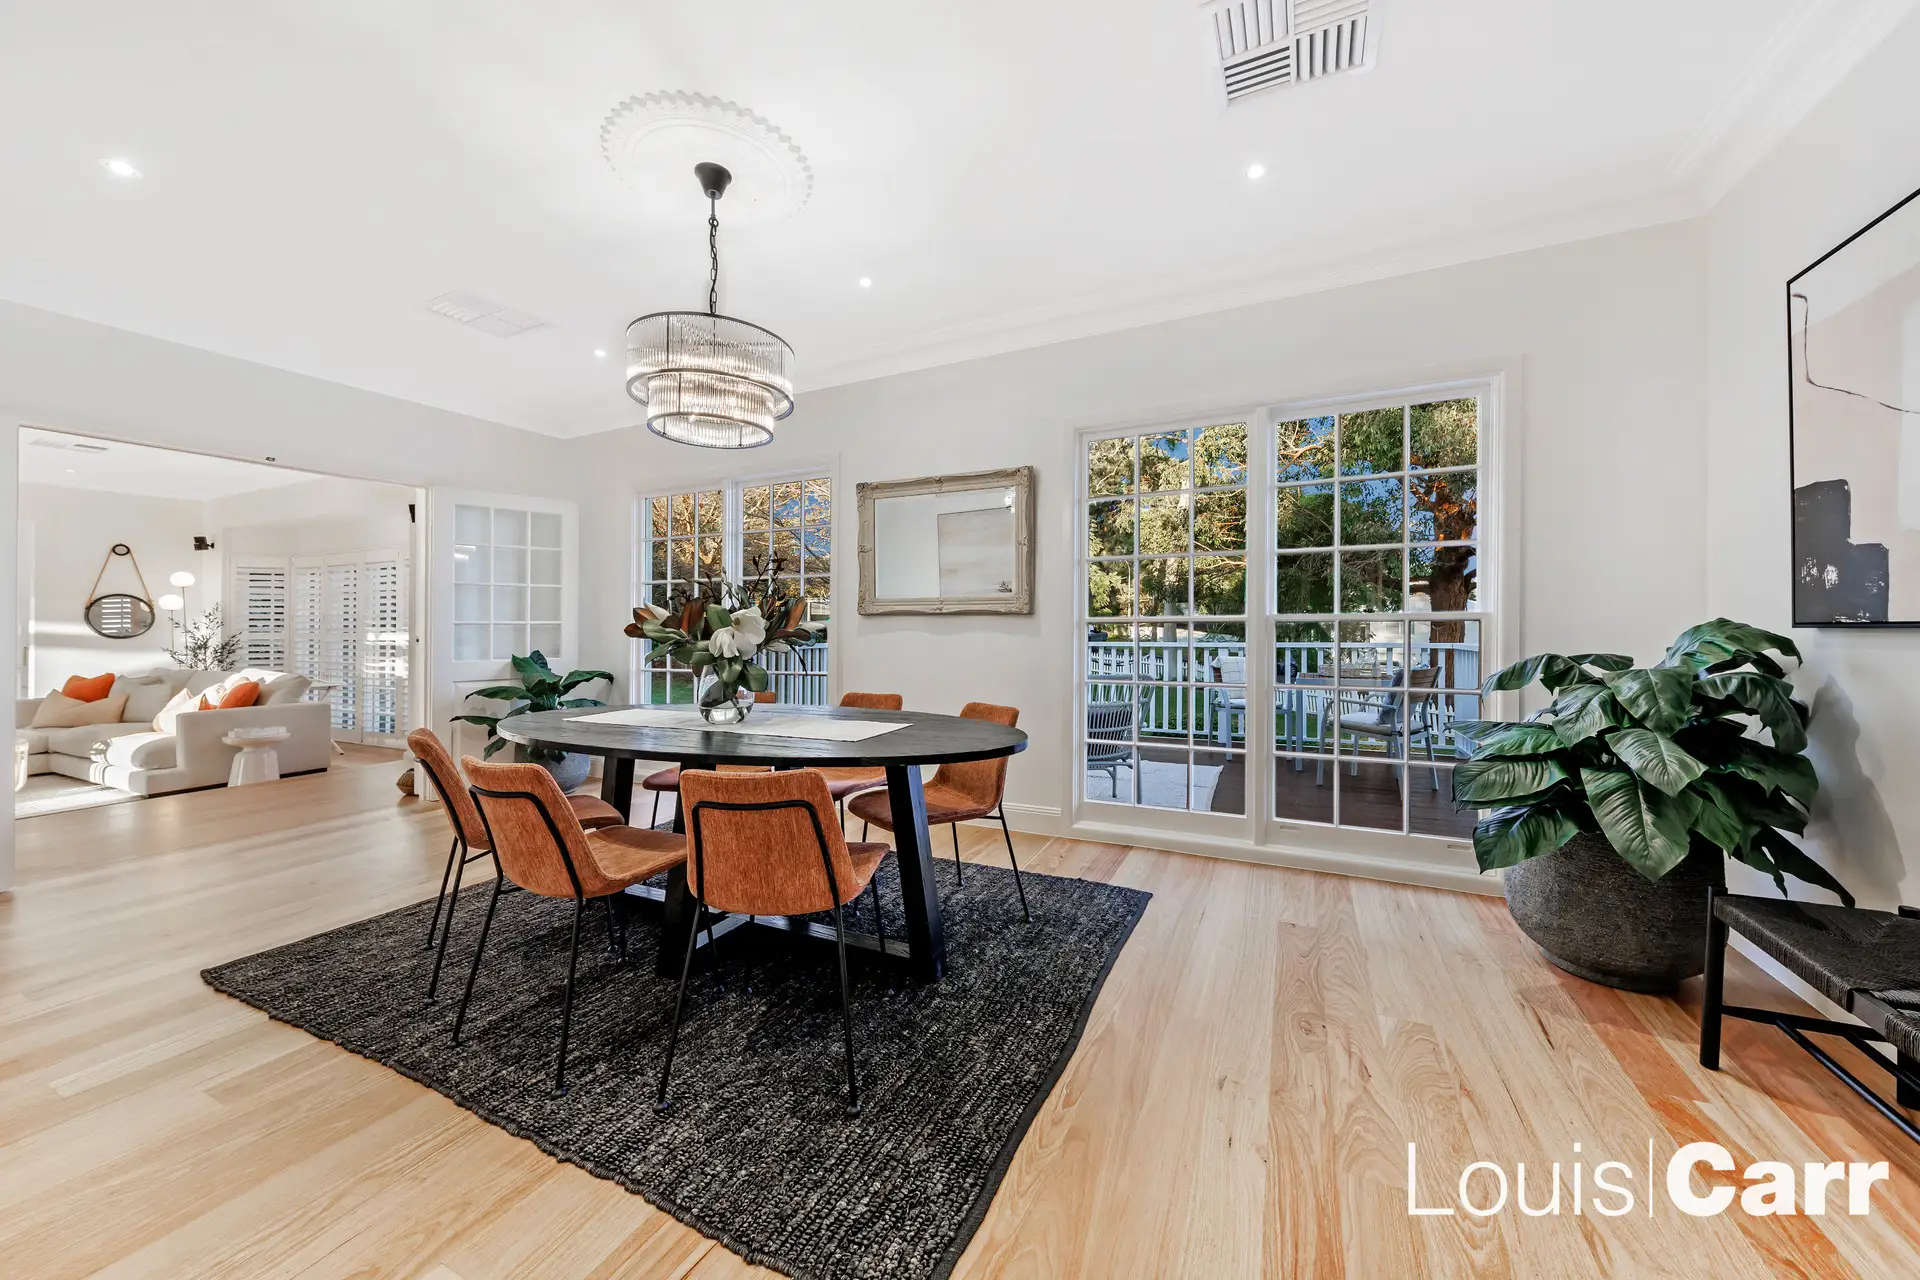 Photo #7: 9 Araluen Place, Glenhaven - Sold by Louis Carr Real Estate